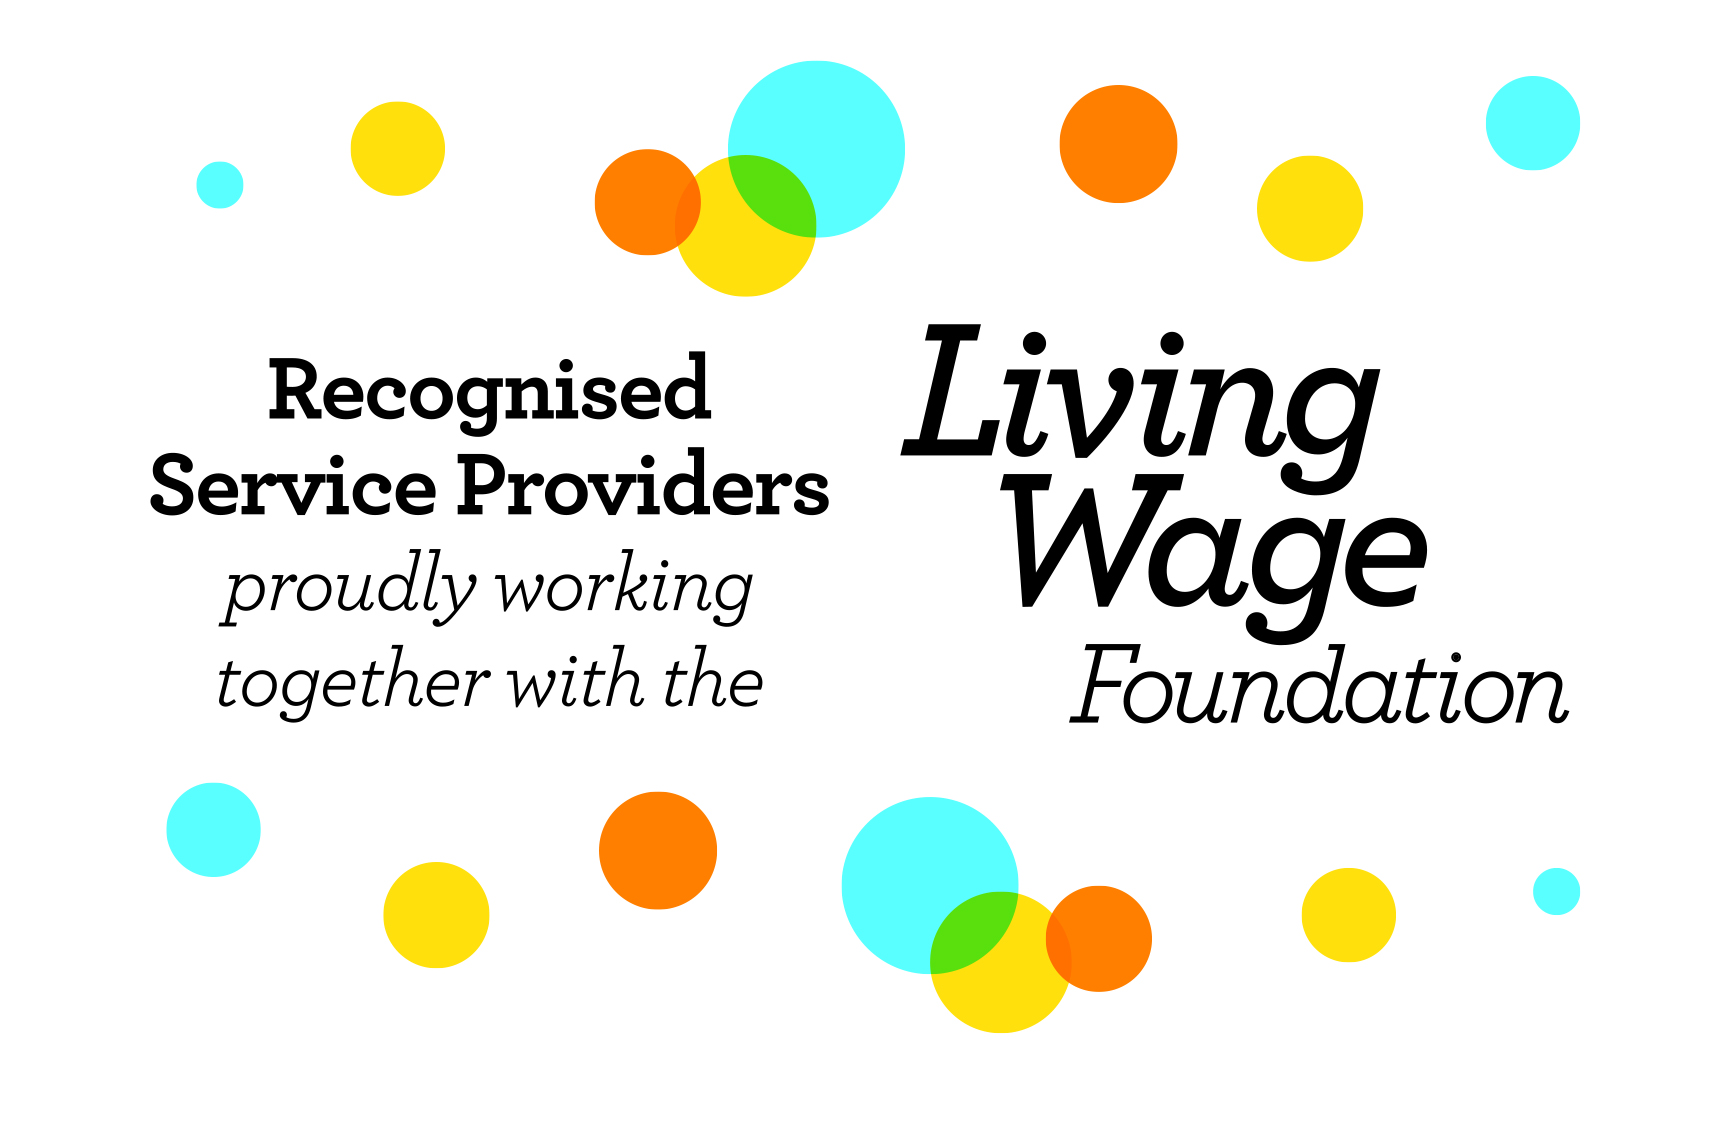 Recognised Service provider icon for Living Wage Foundation